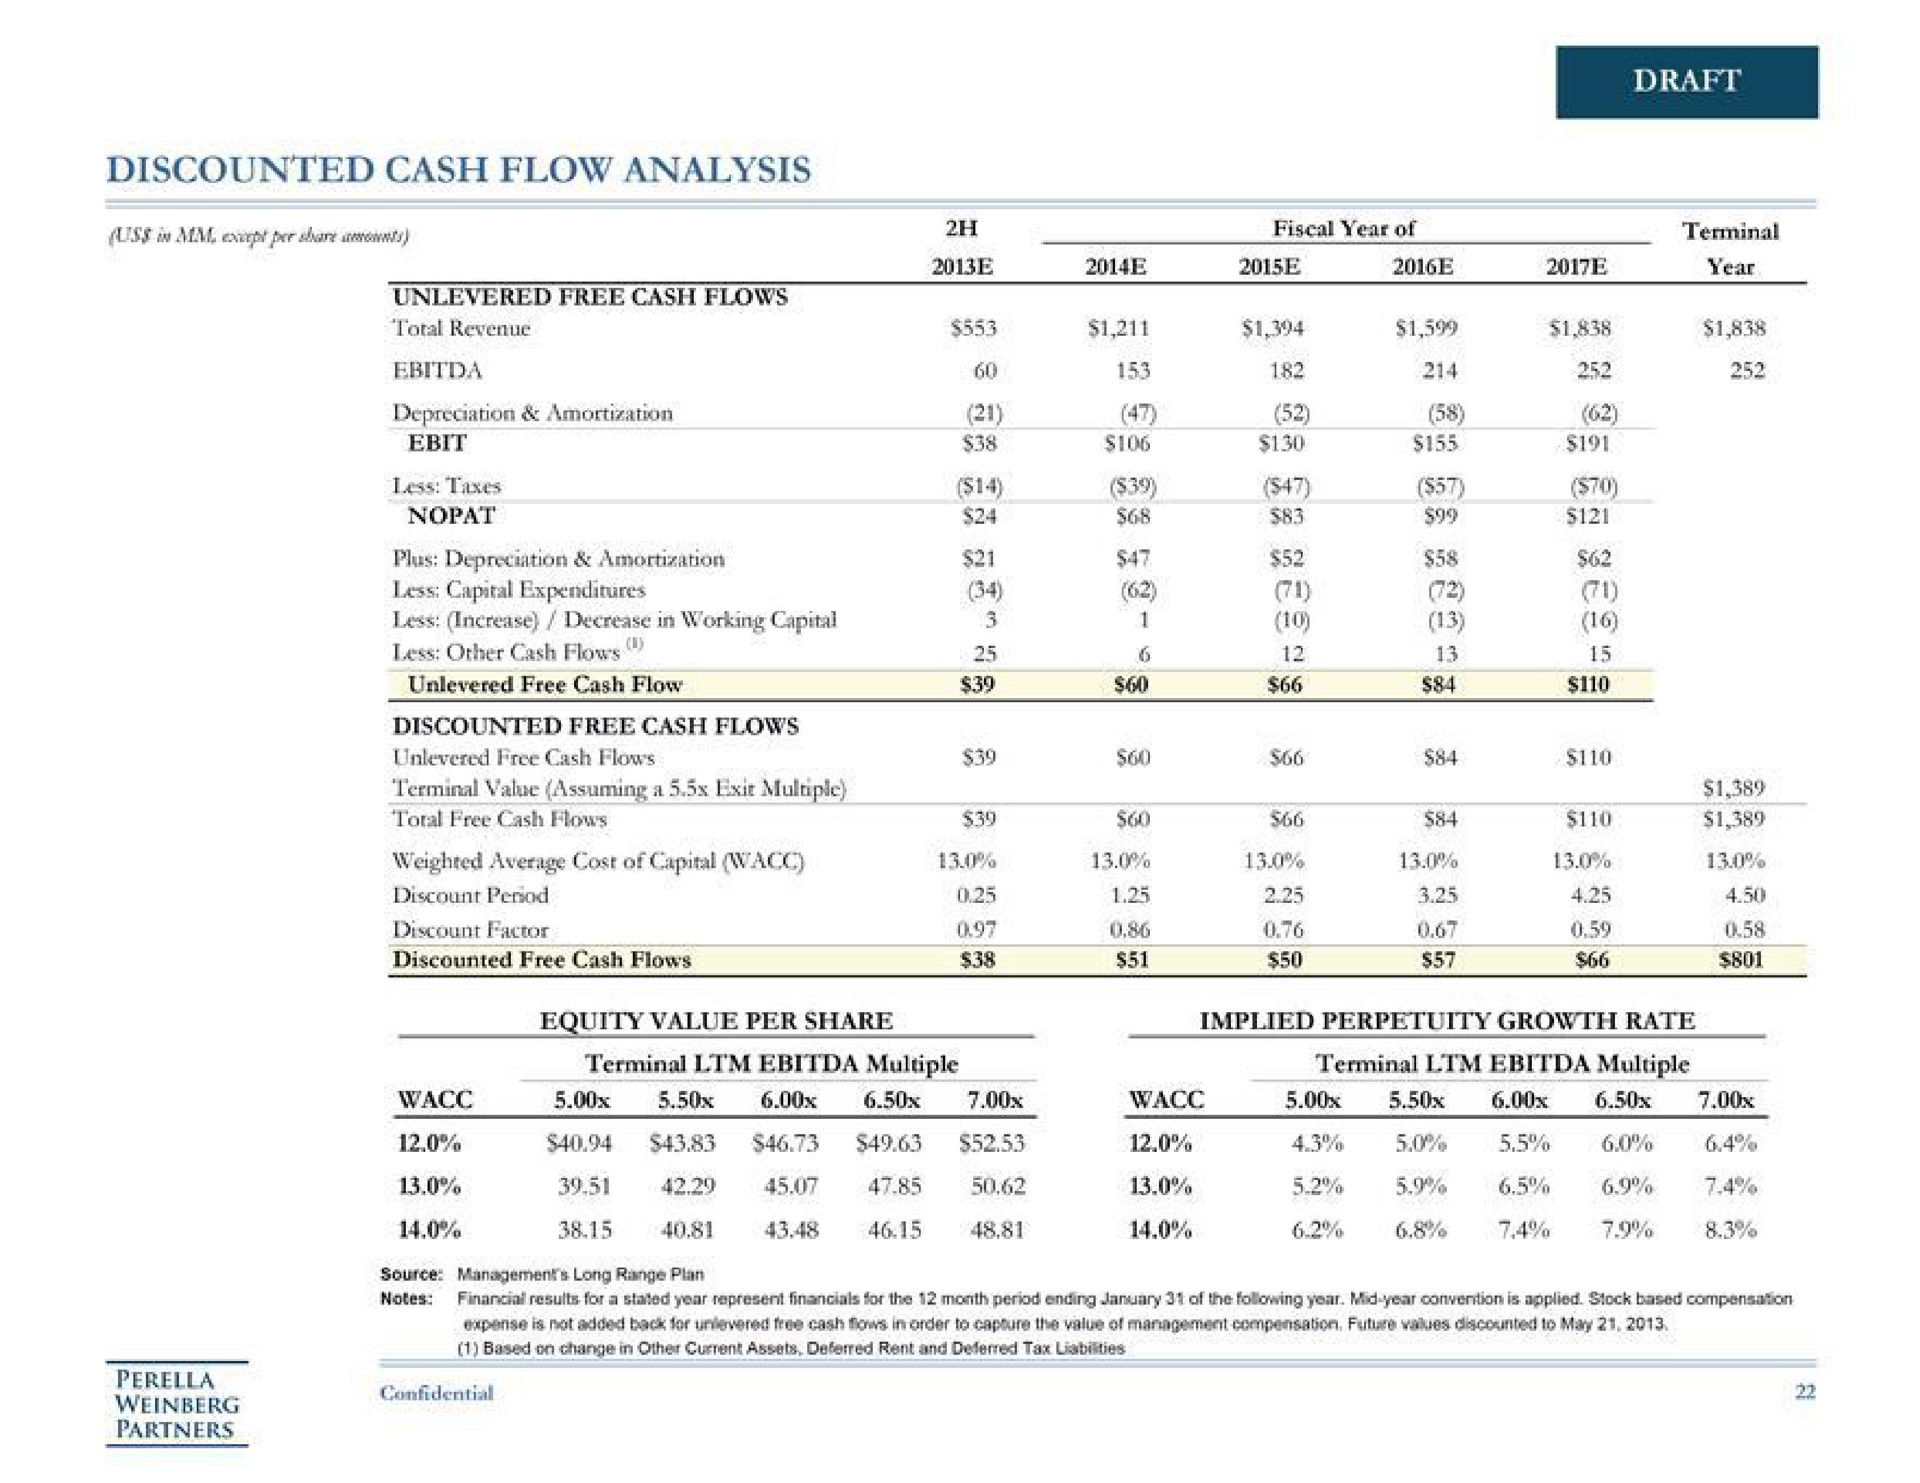 discounted cash flow analysis less taxes less other cash flows discount factor | Perella Weinberg Partners